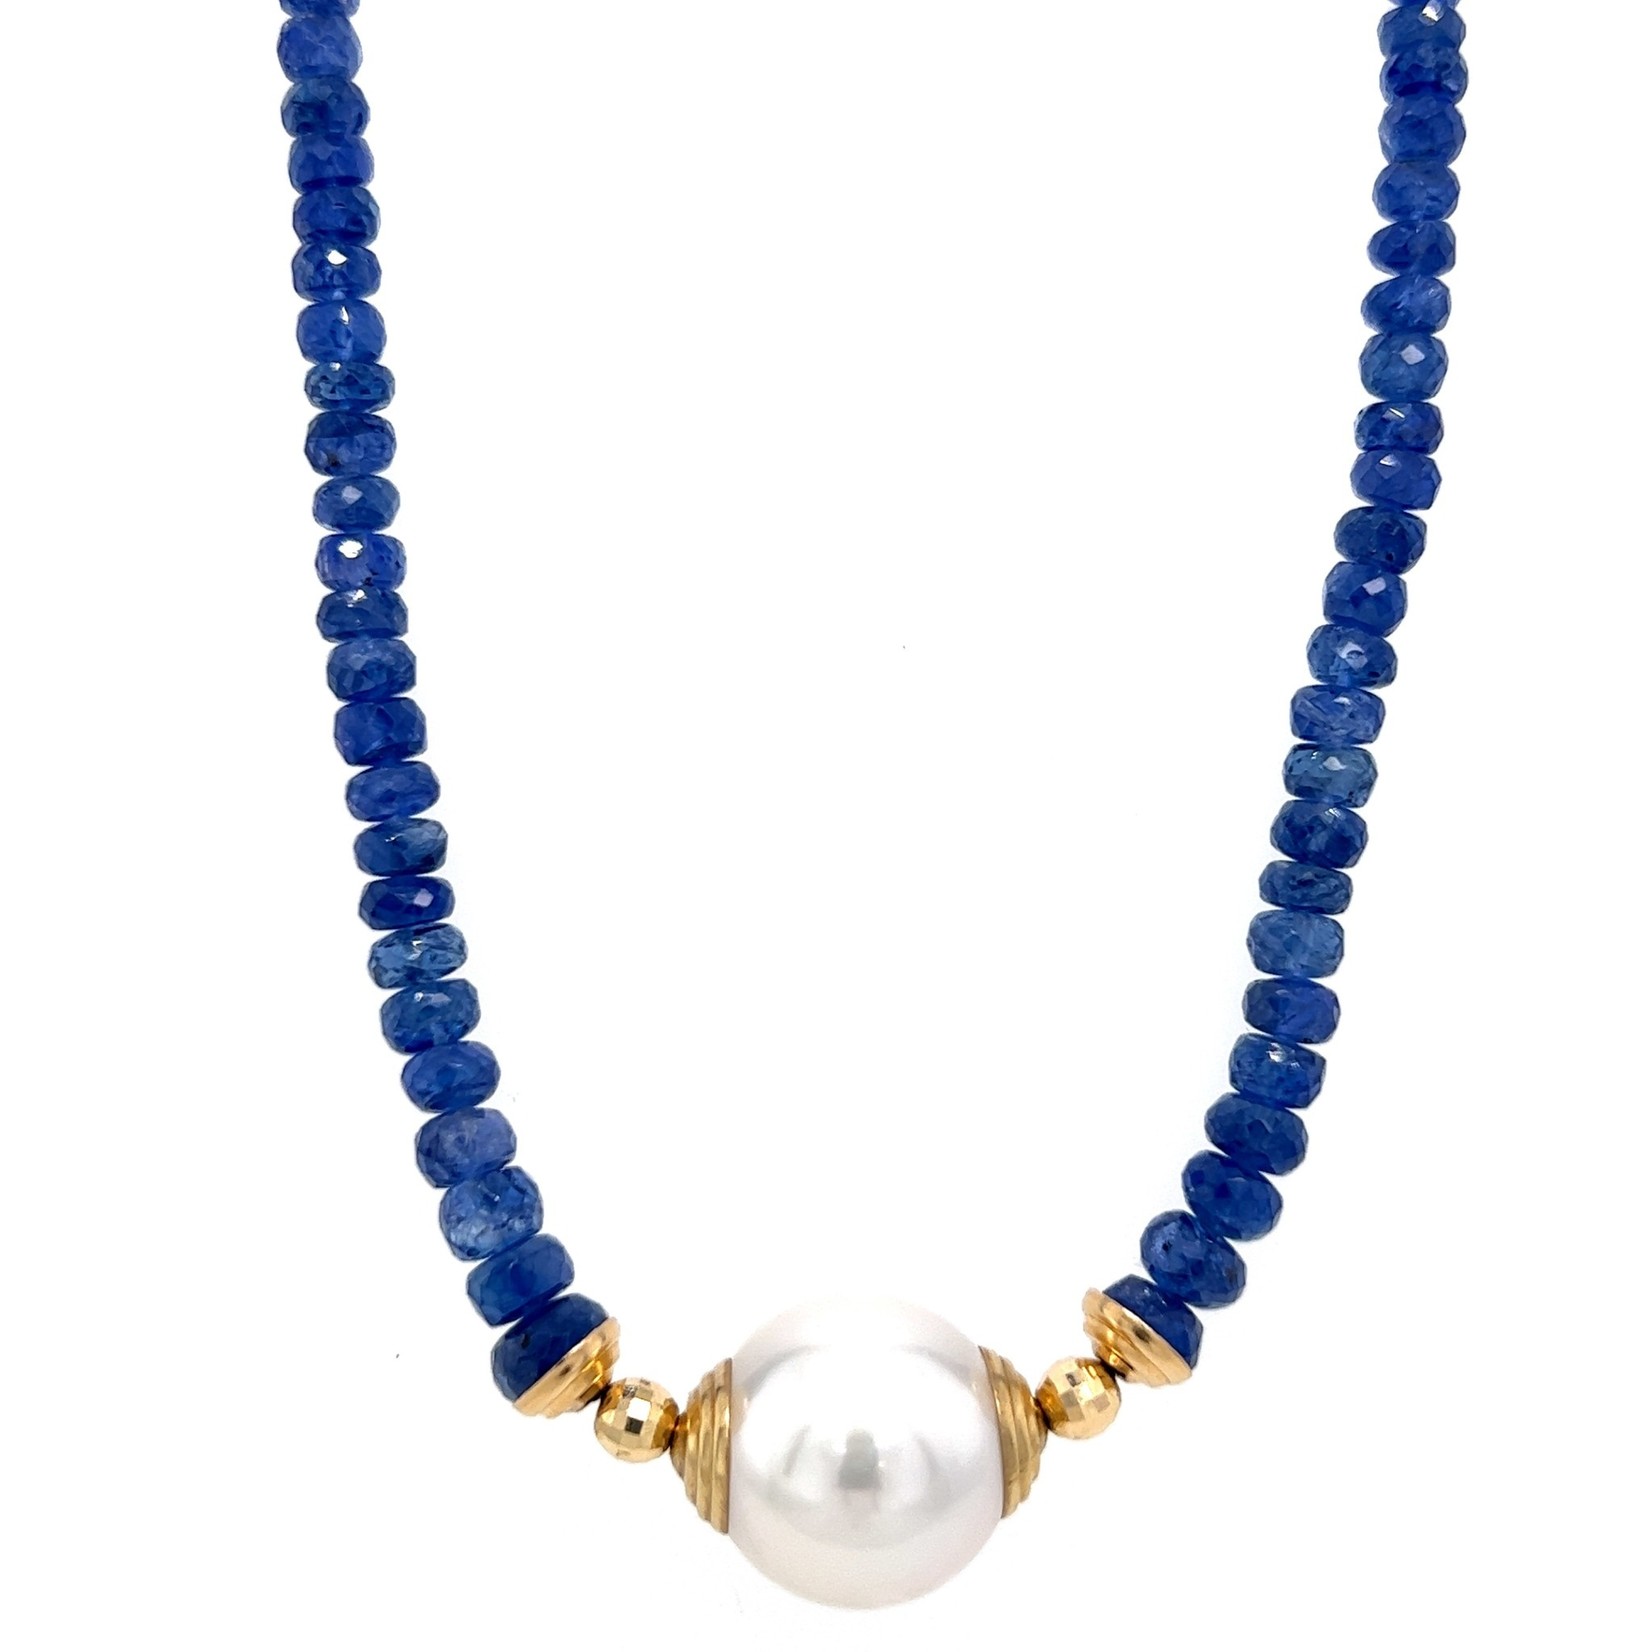 14K Yellow Gold 17" Graduated Cornflower Blue Sapphire with 15mm White South Sea Pearl Necklace